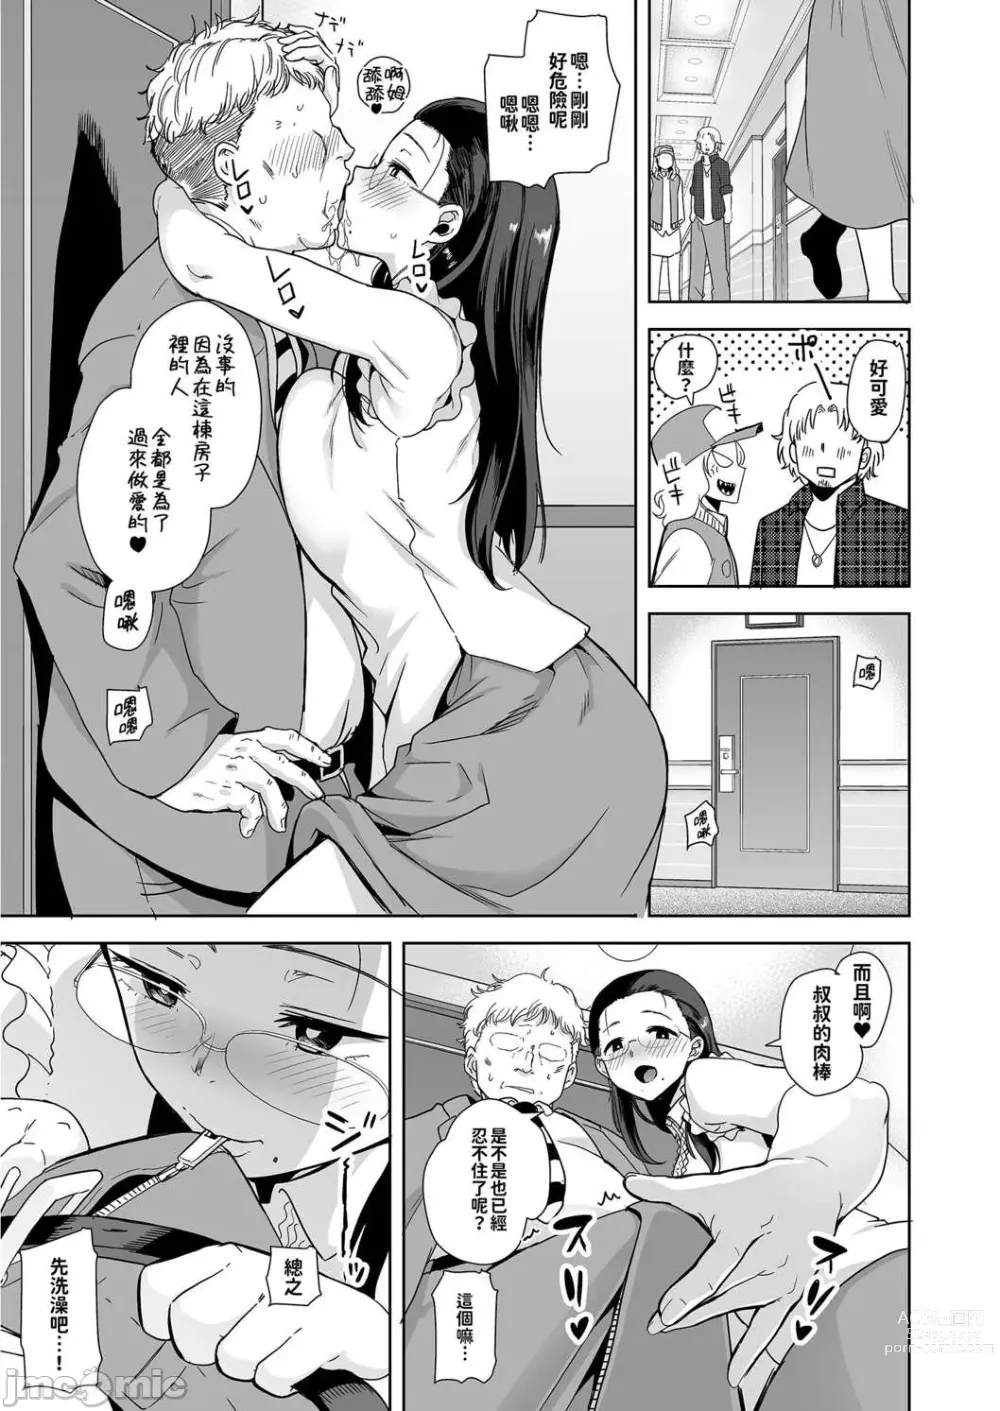 Page 8 of manga Seika Jogakuin High School Official Rod Uncle